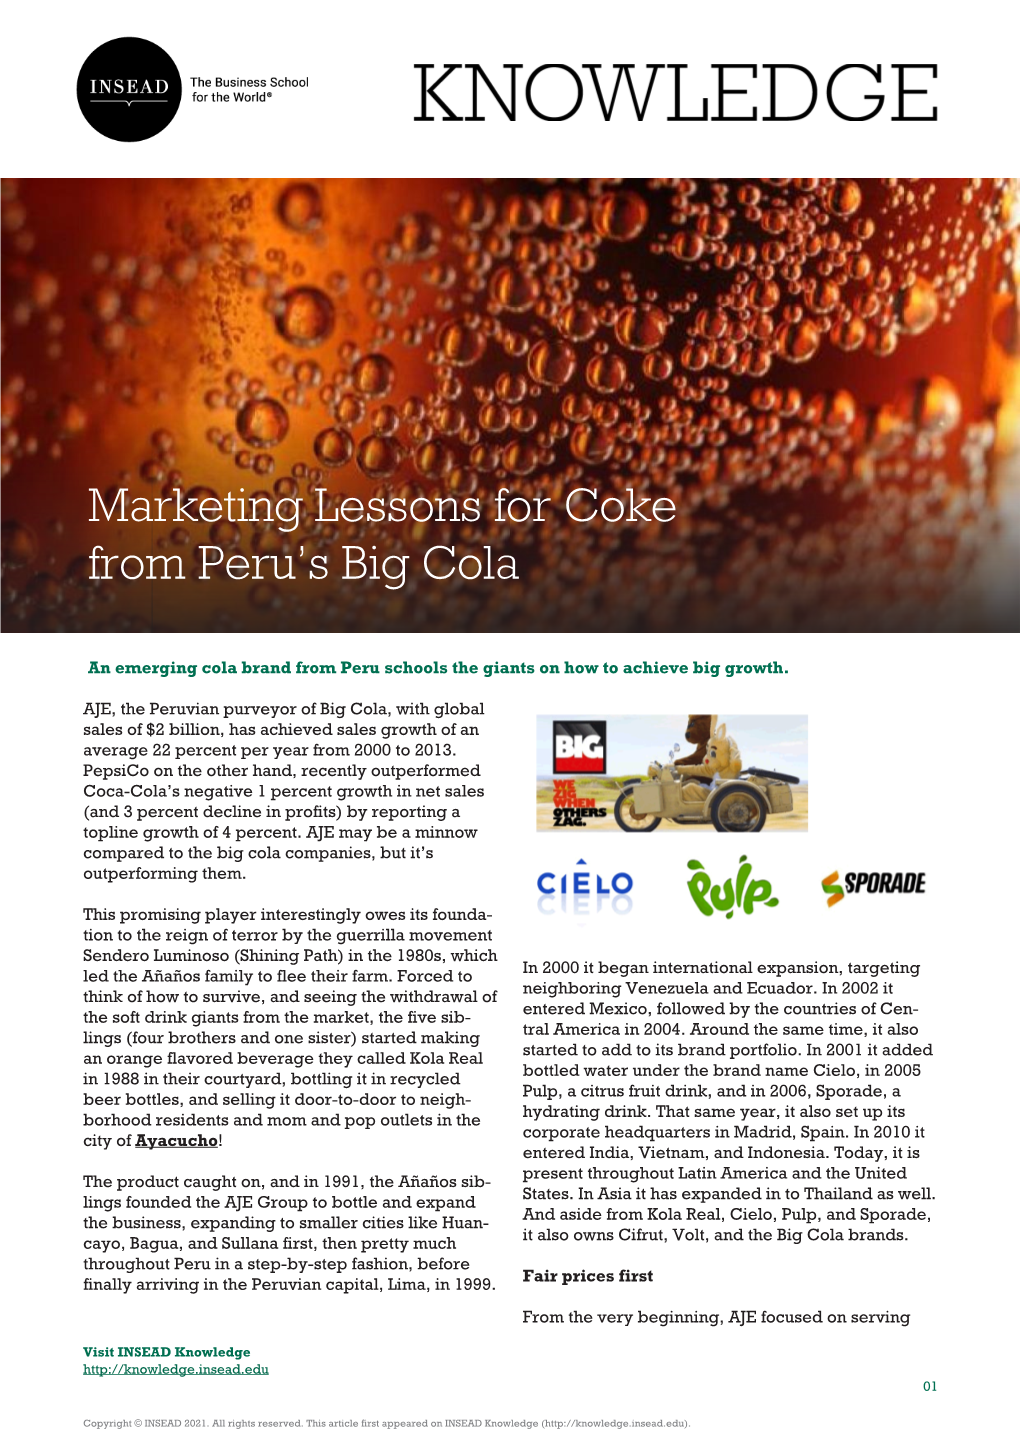 Marketing Lessons for Coke from Peru's Big Cola